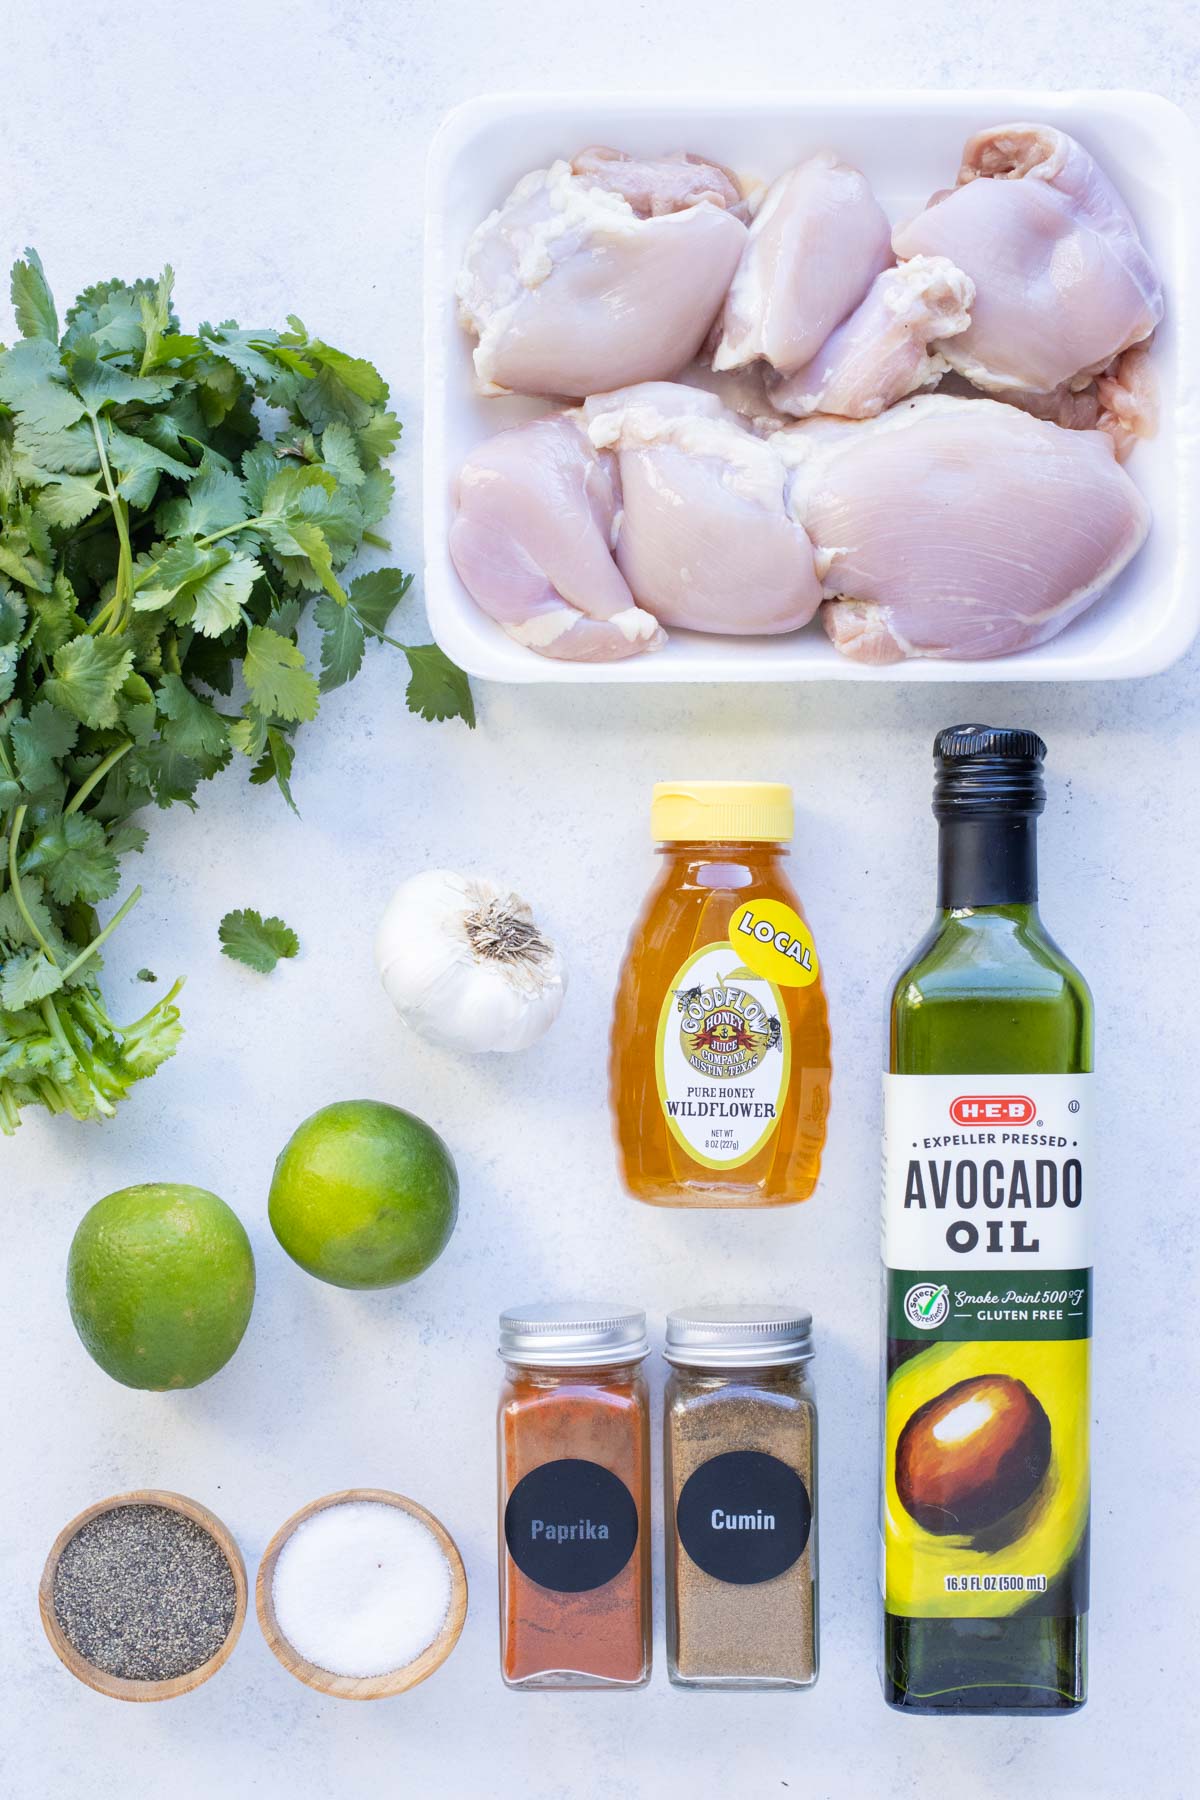 Chicken thighs, cilantro, lime, garlic, oil, honey, and seasonings are the ingredients for this recipe.